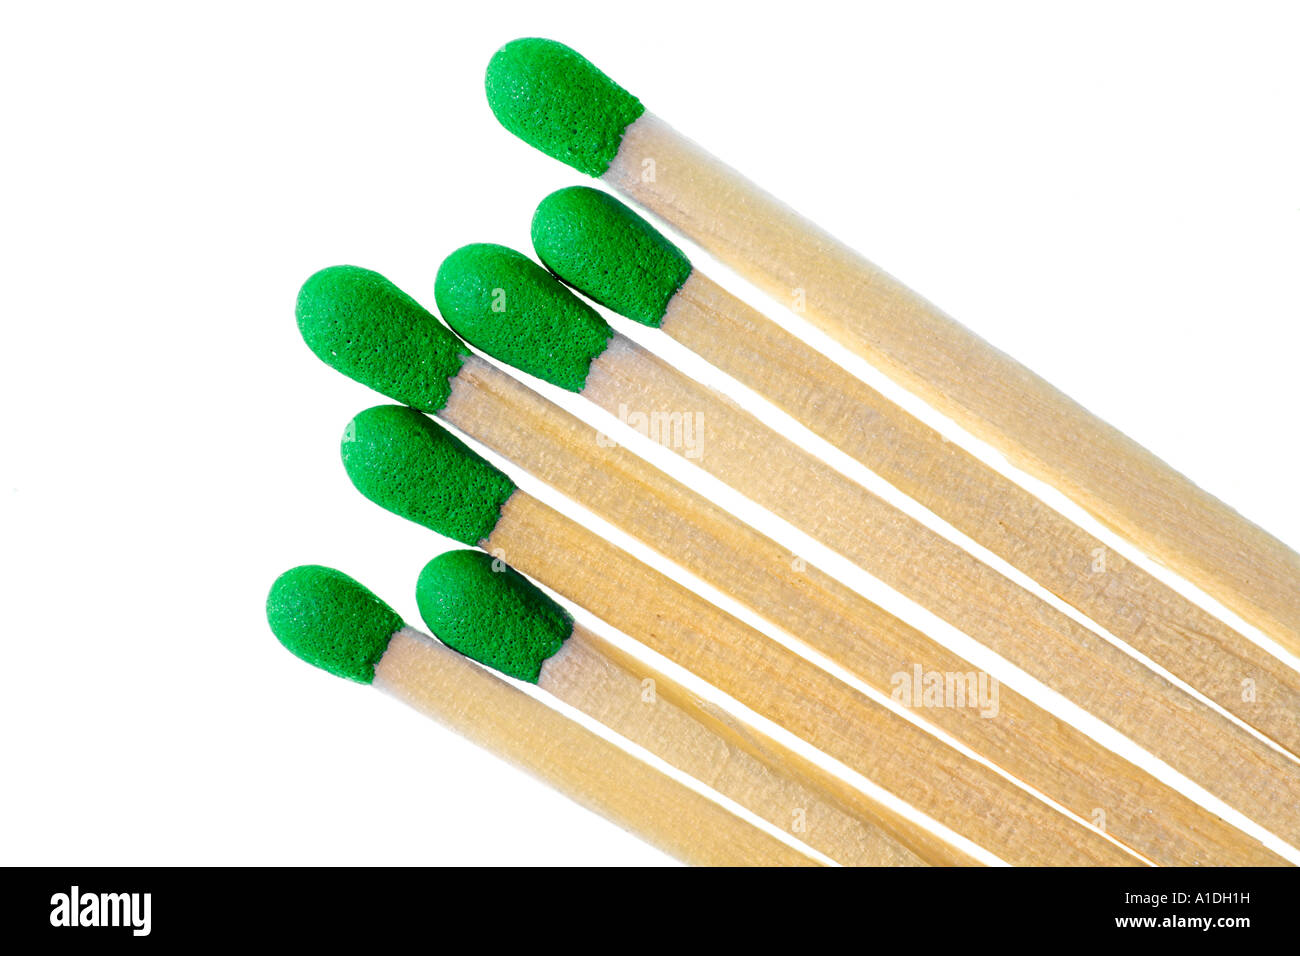 Matches with green match heads on white background Stock Photo